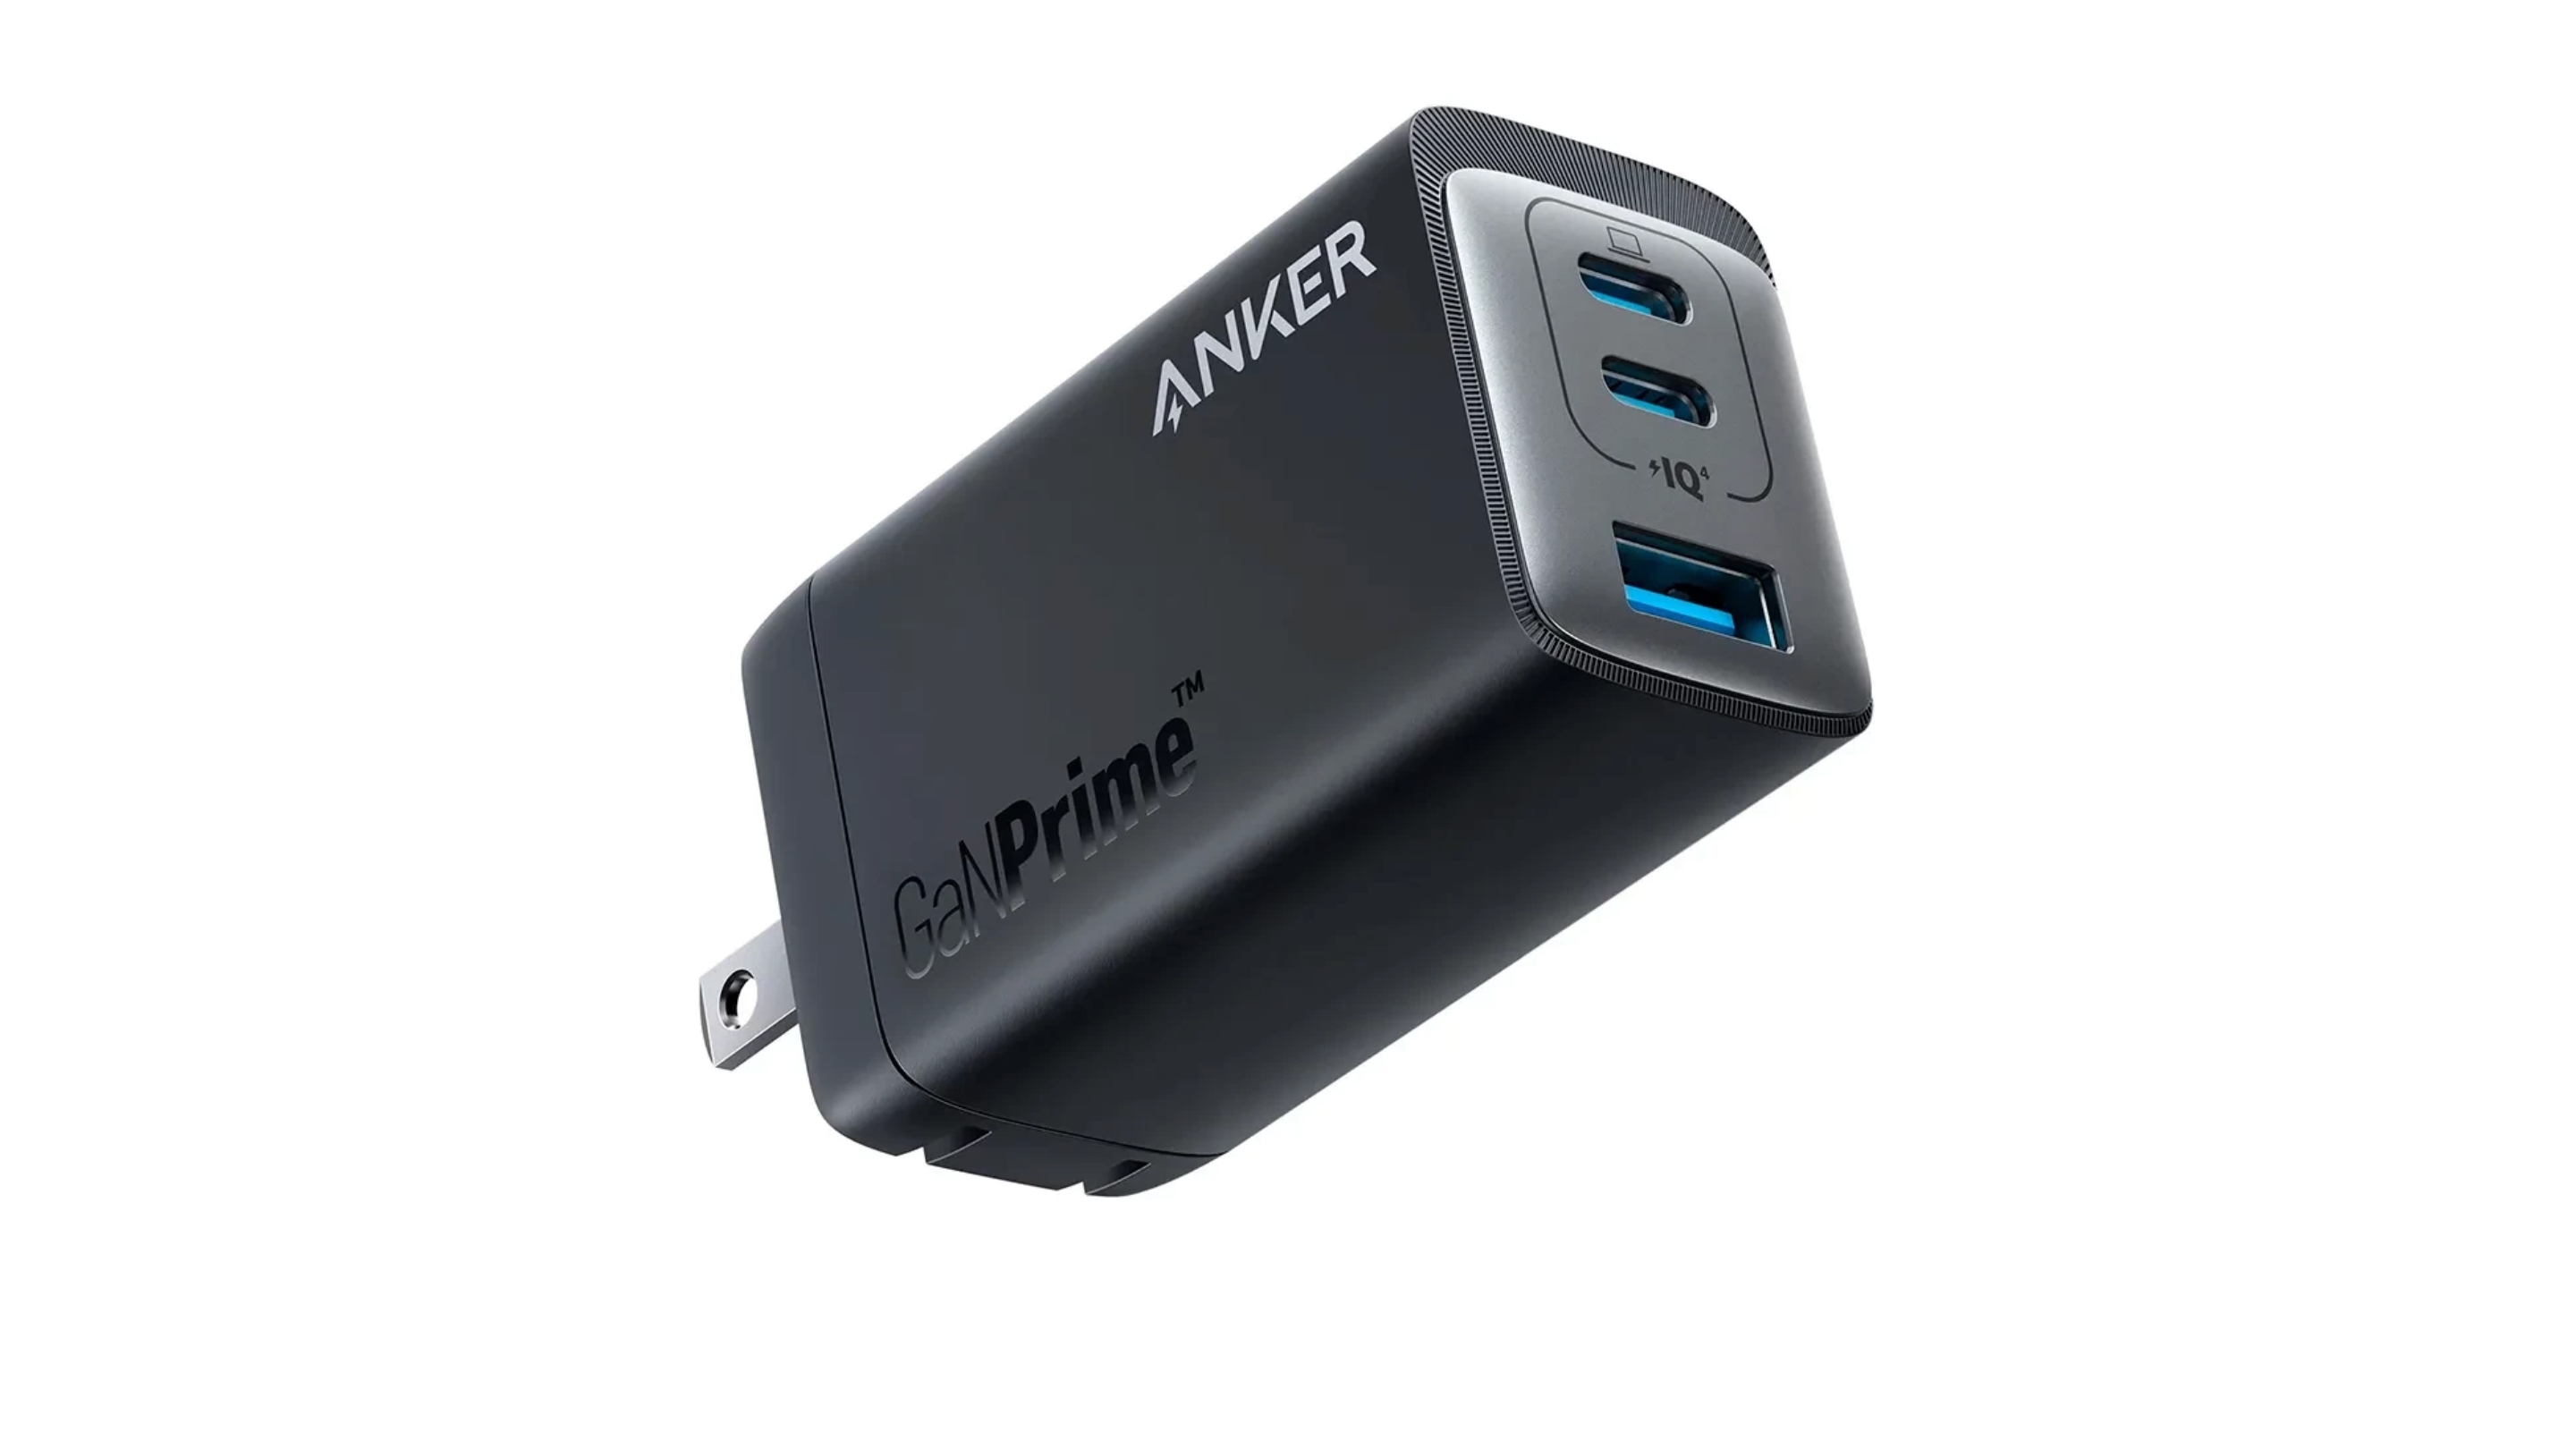 Anker 735 on Amazon: a compact charger for smartphone, tablet and laptop with 65W power and three USB ports for $21 off